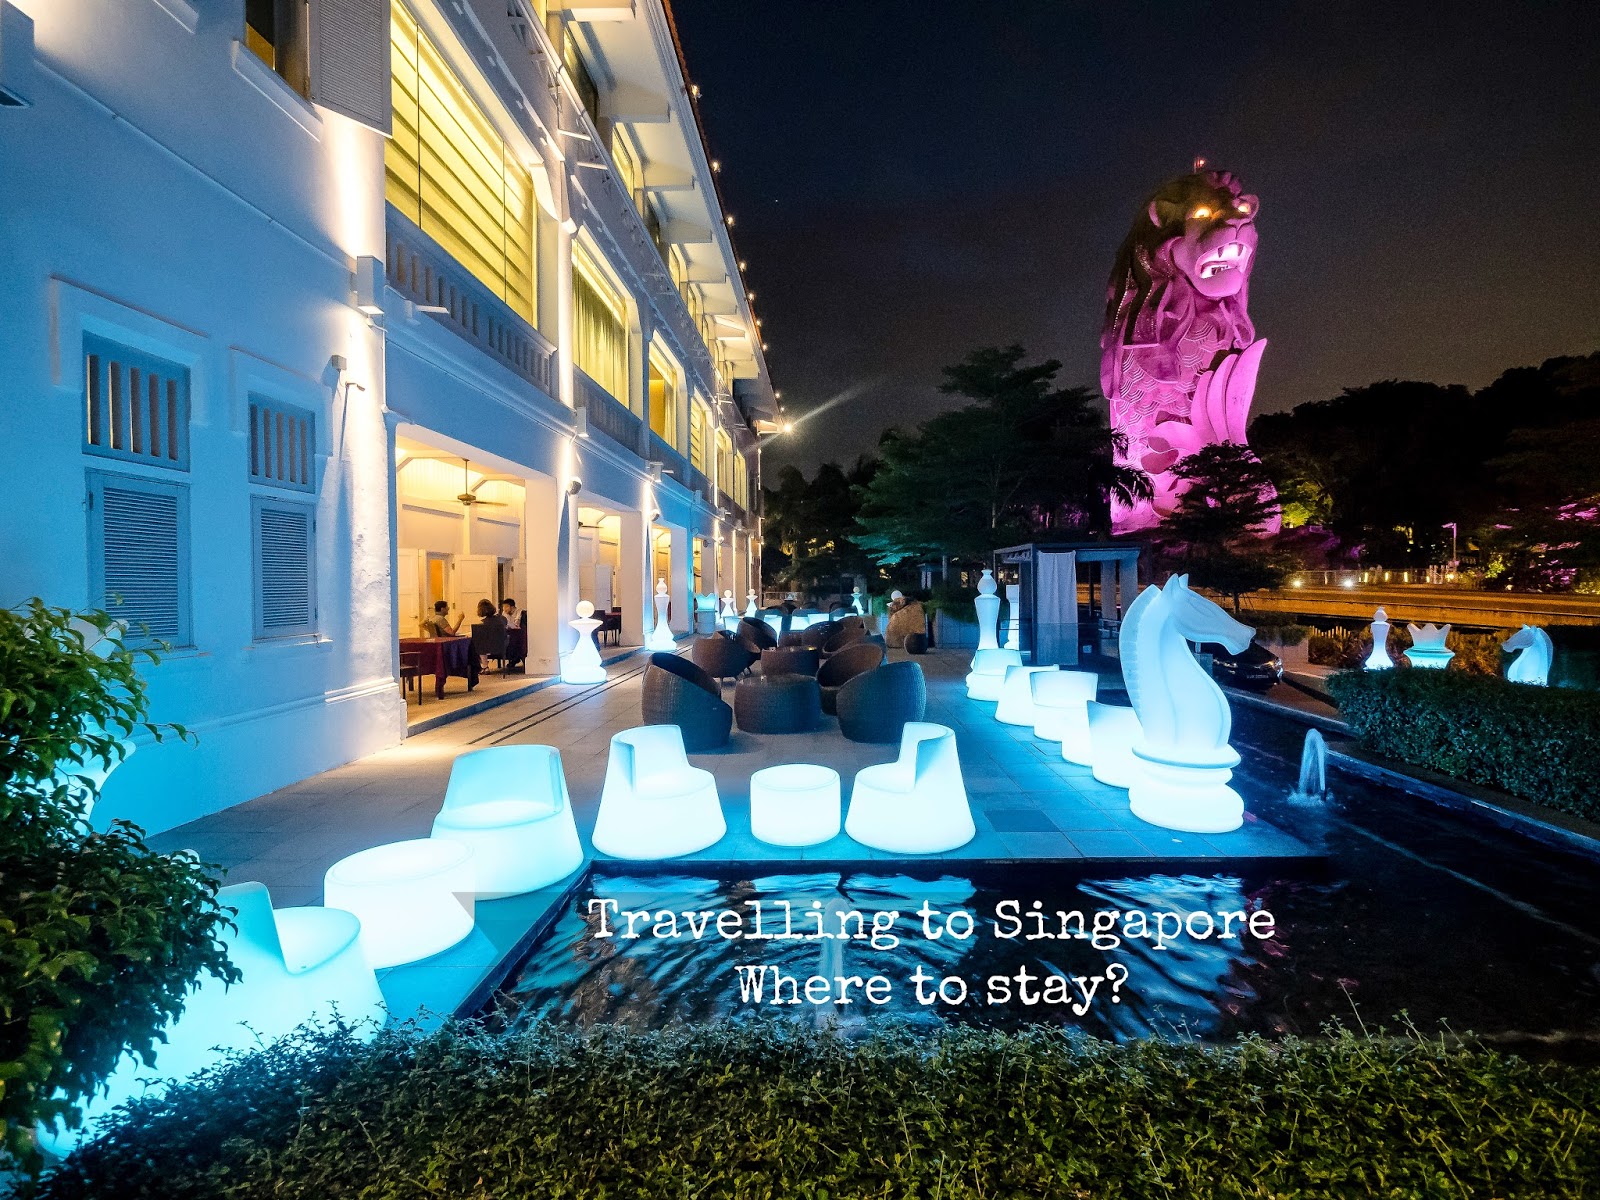 Holiday in Singapore : Where to stay ?